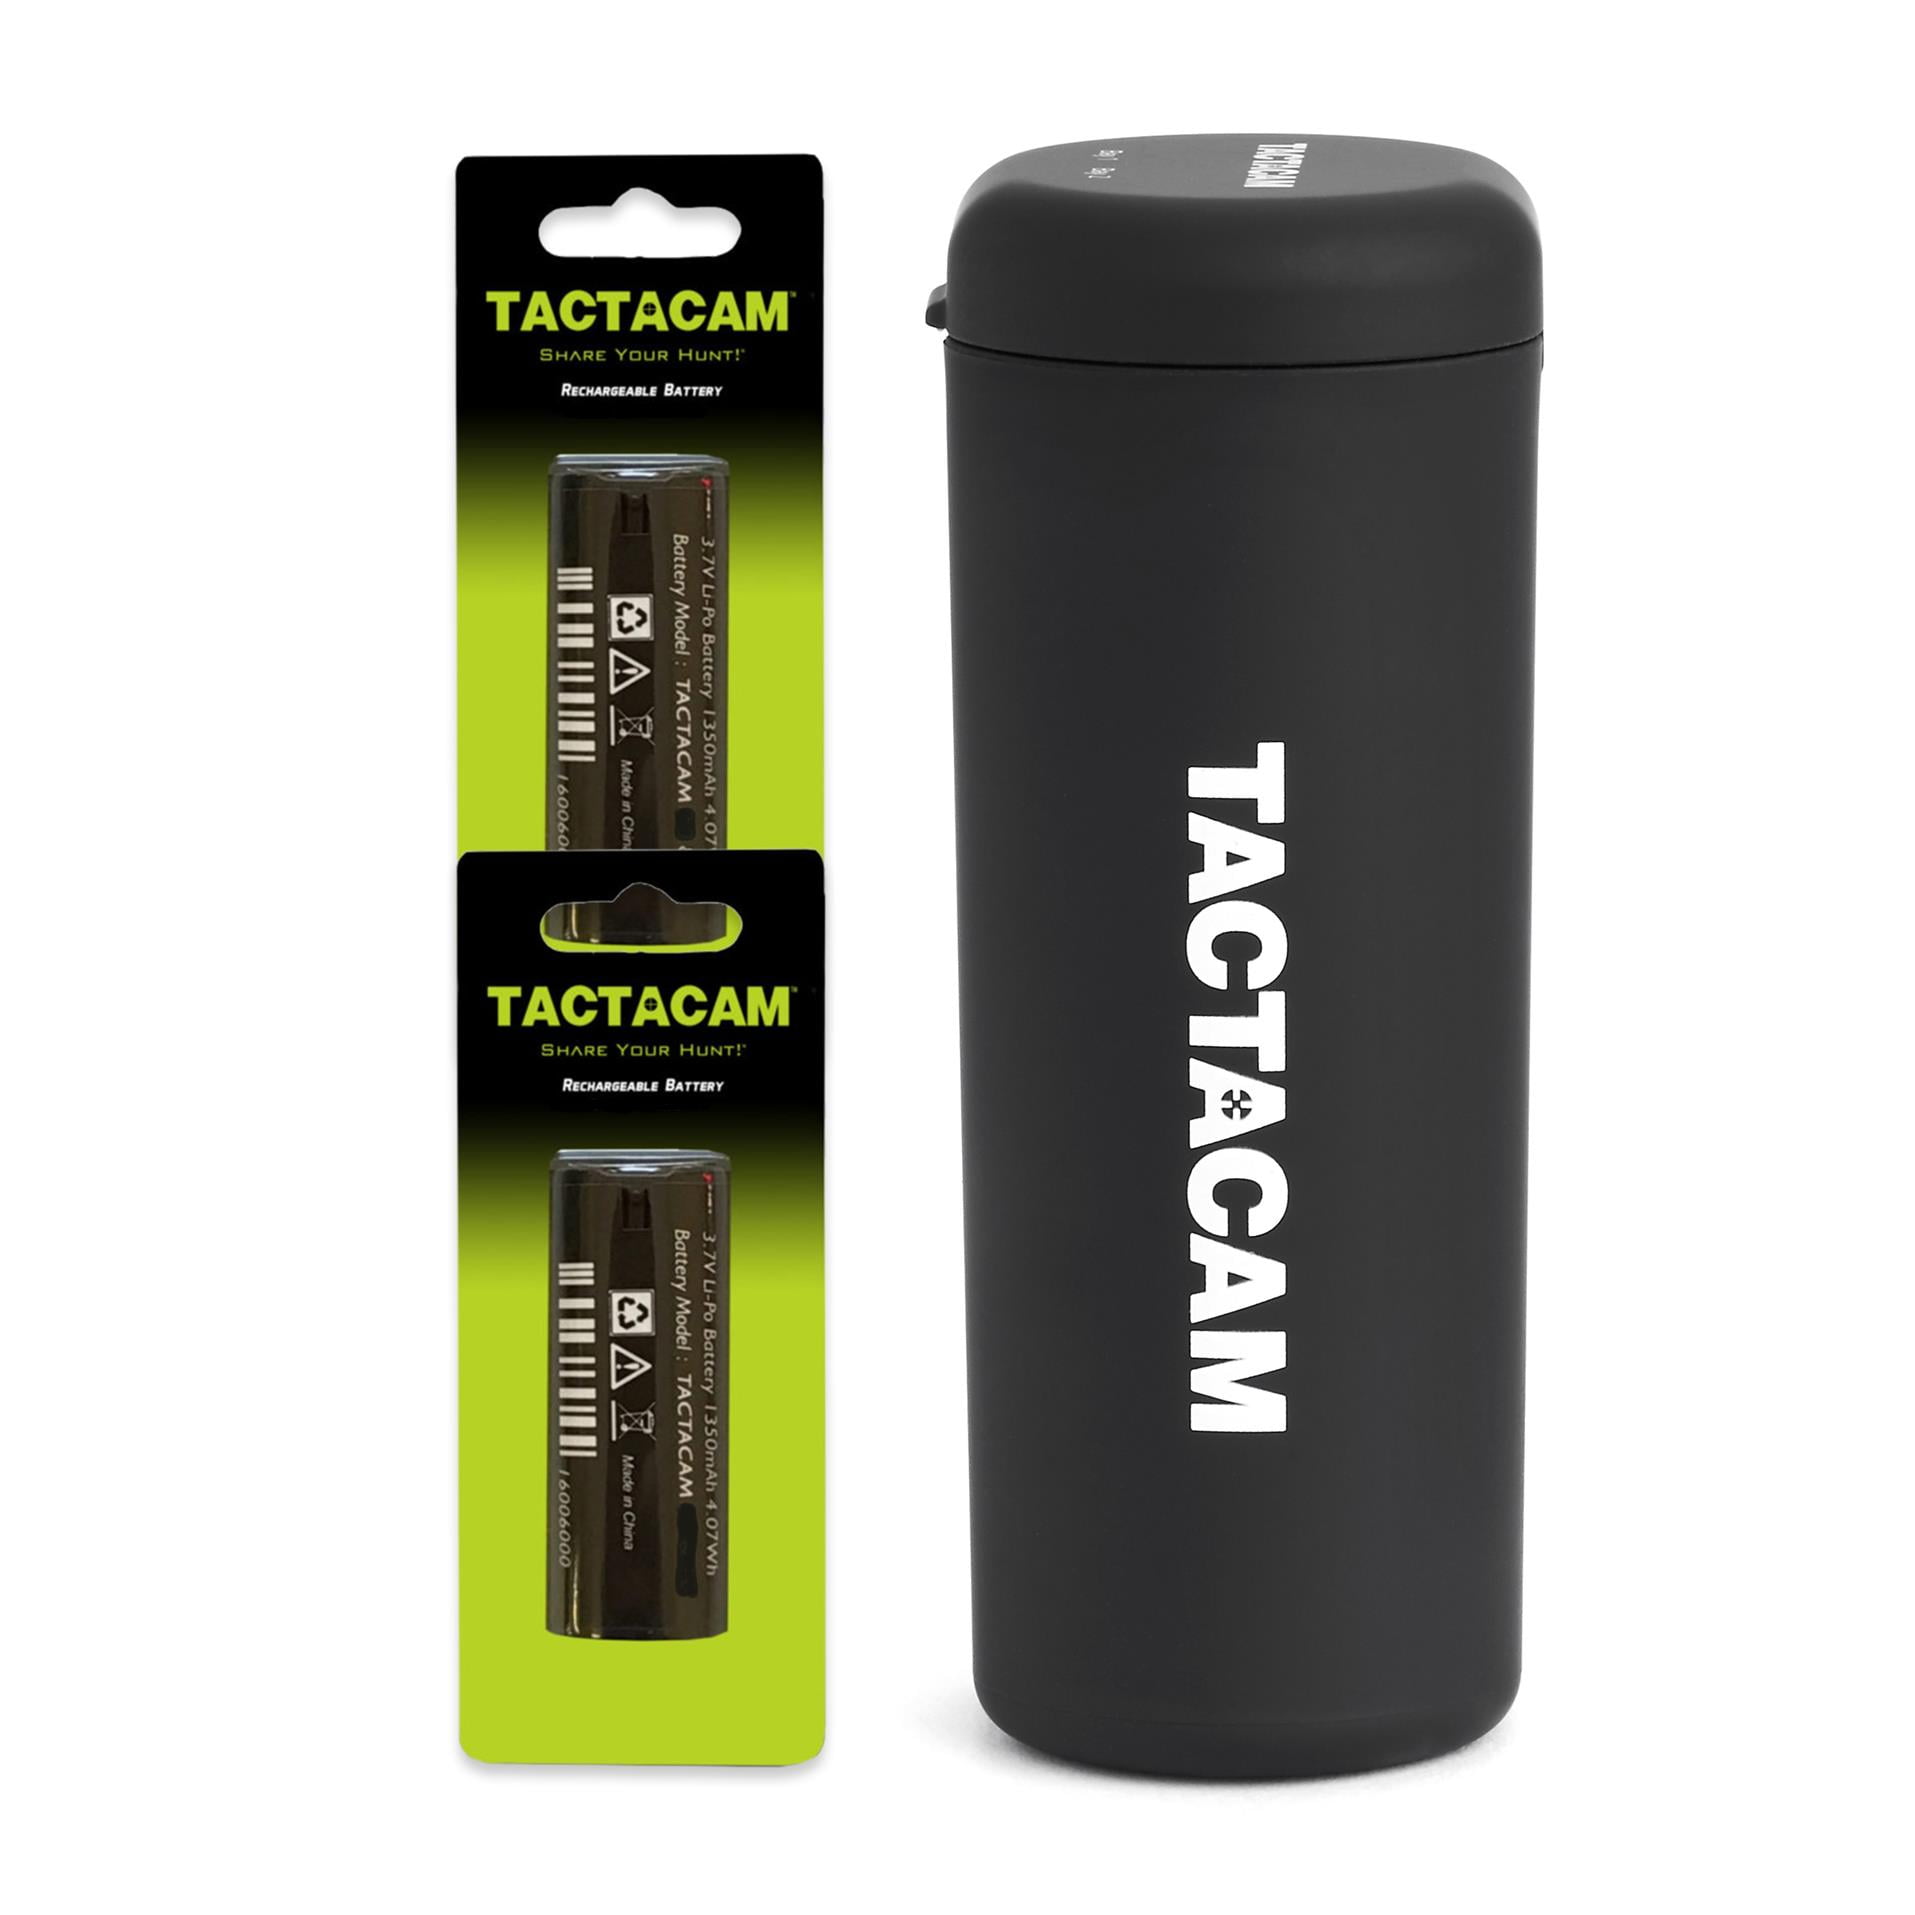 TACTACAM Dual Battery Charger for 3.0 & 4.0 